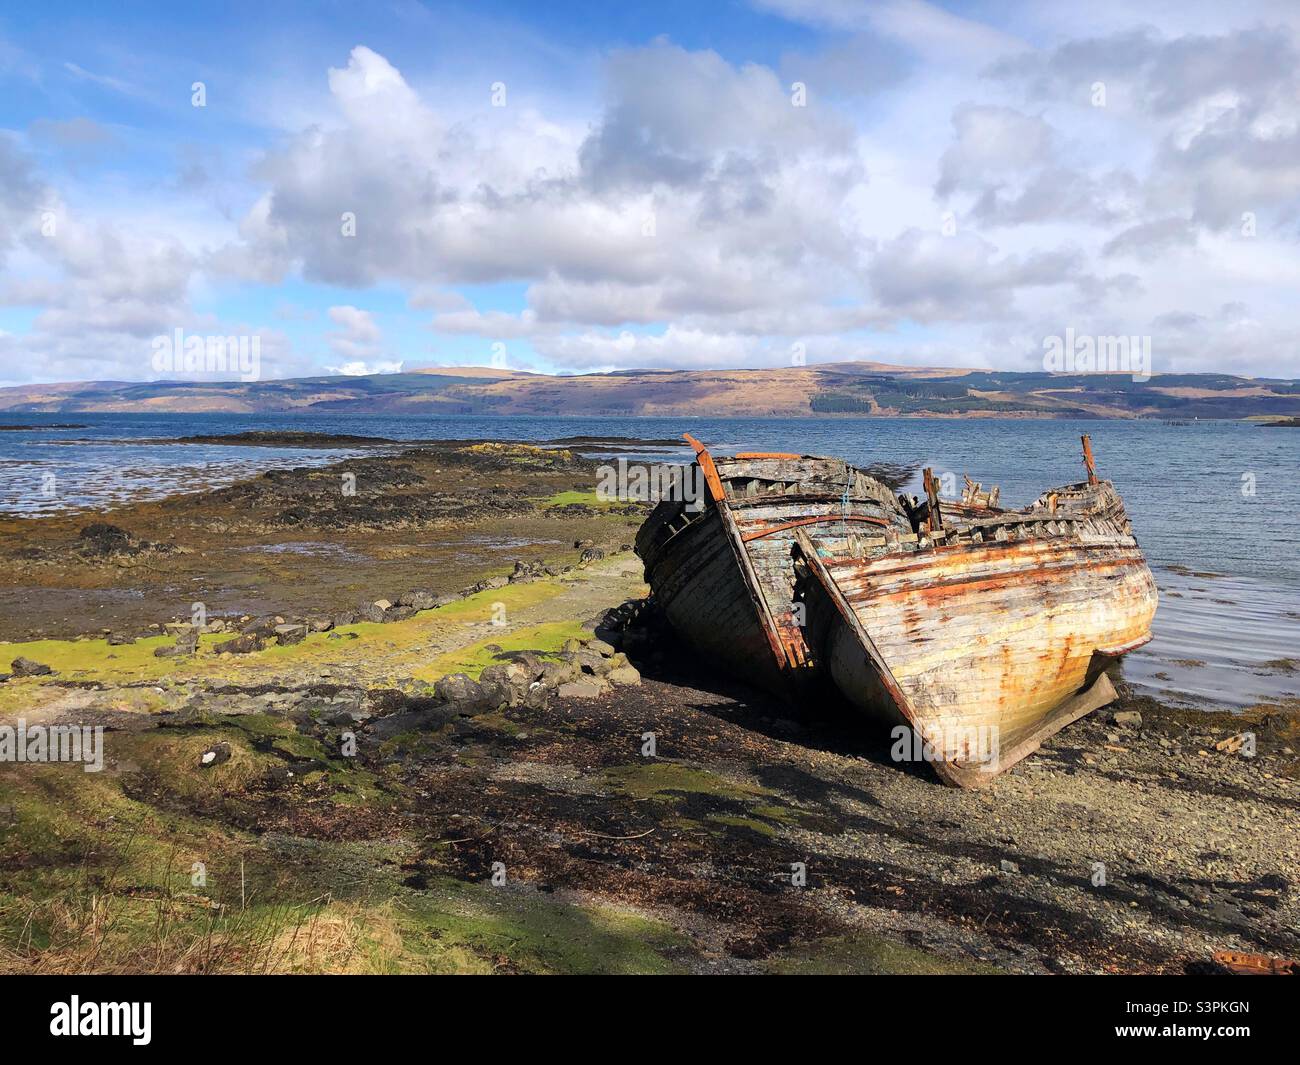 Wrecked wooden boats at Salen, Isle of Mull, Scotland Stock Photo